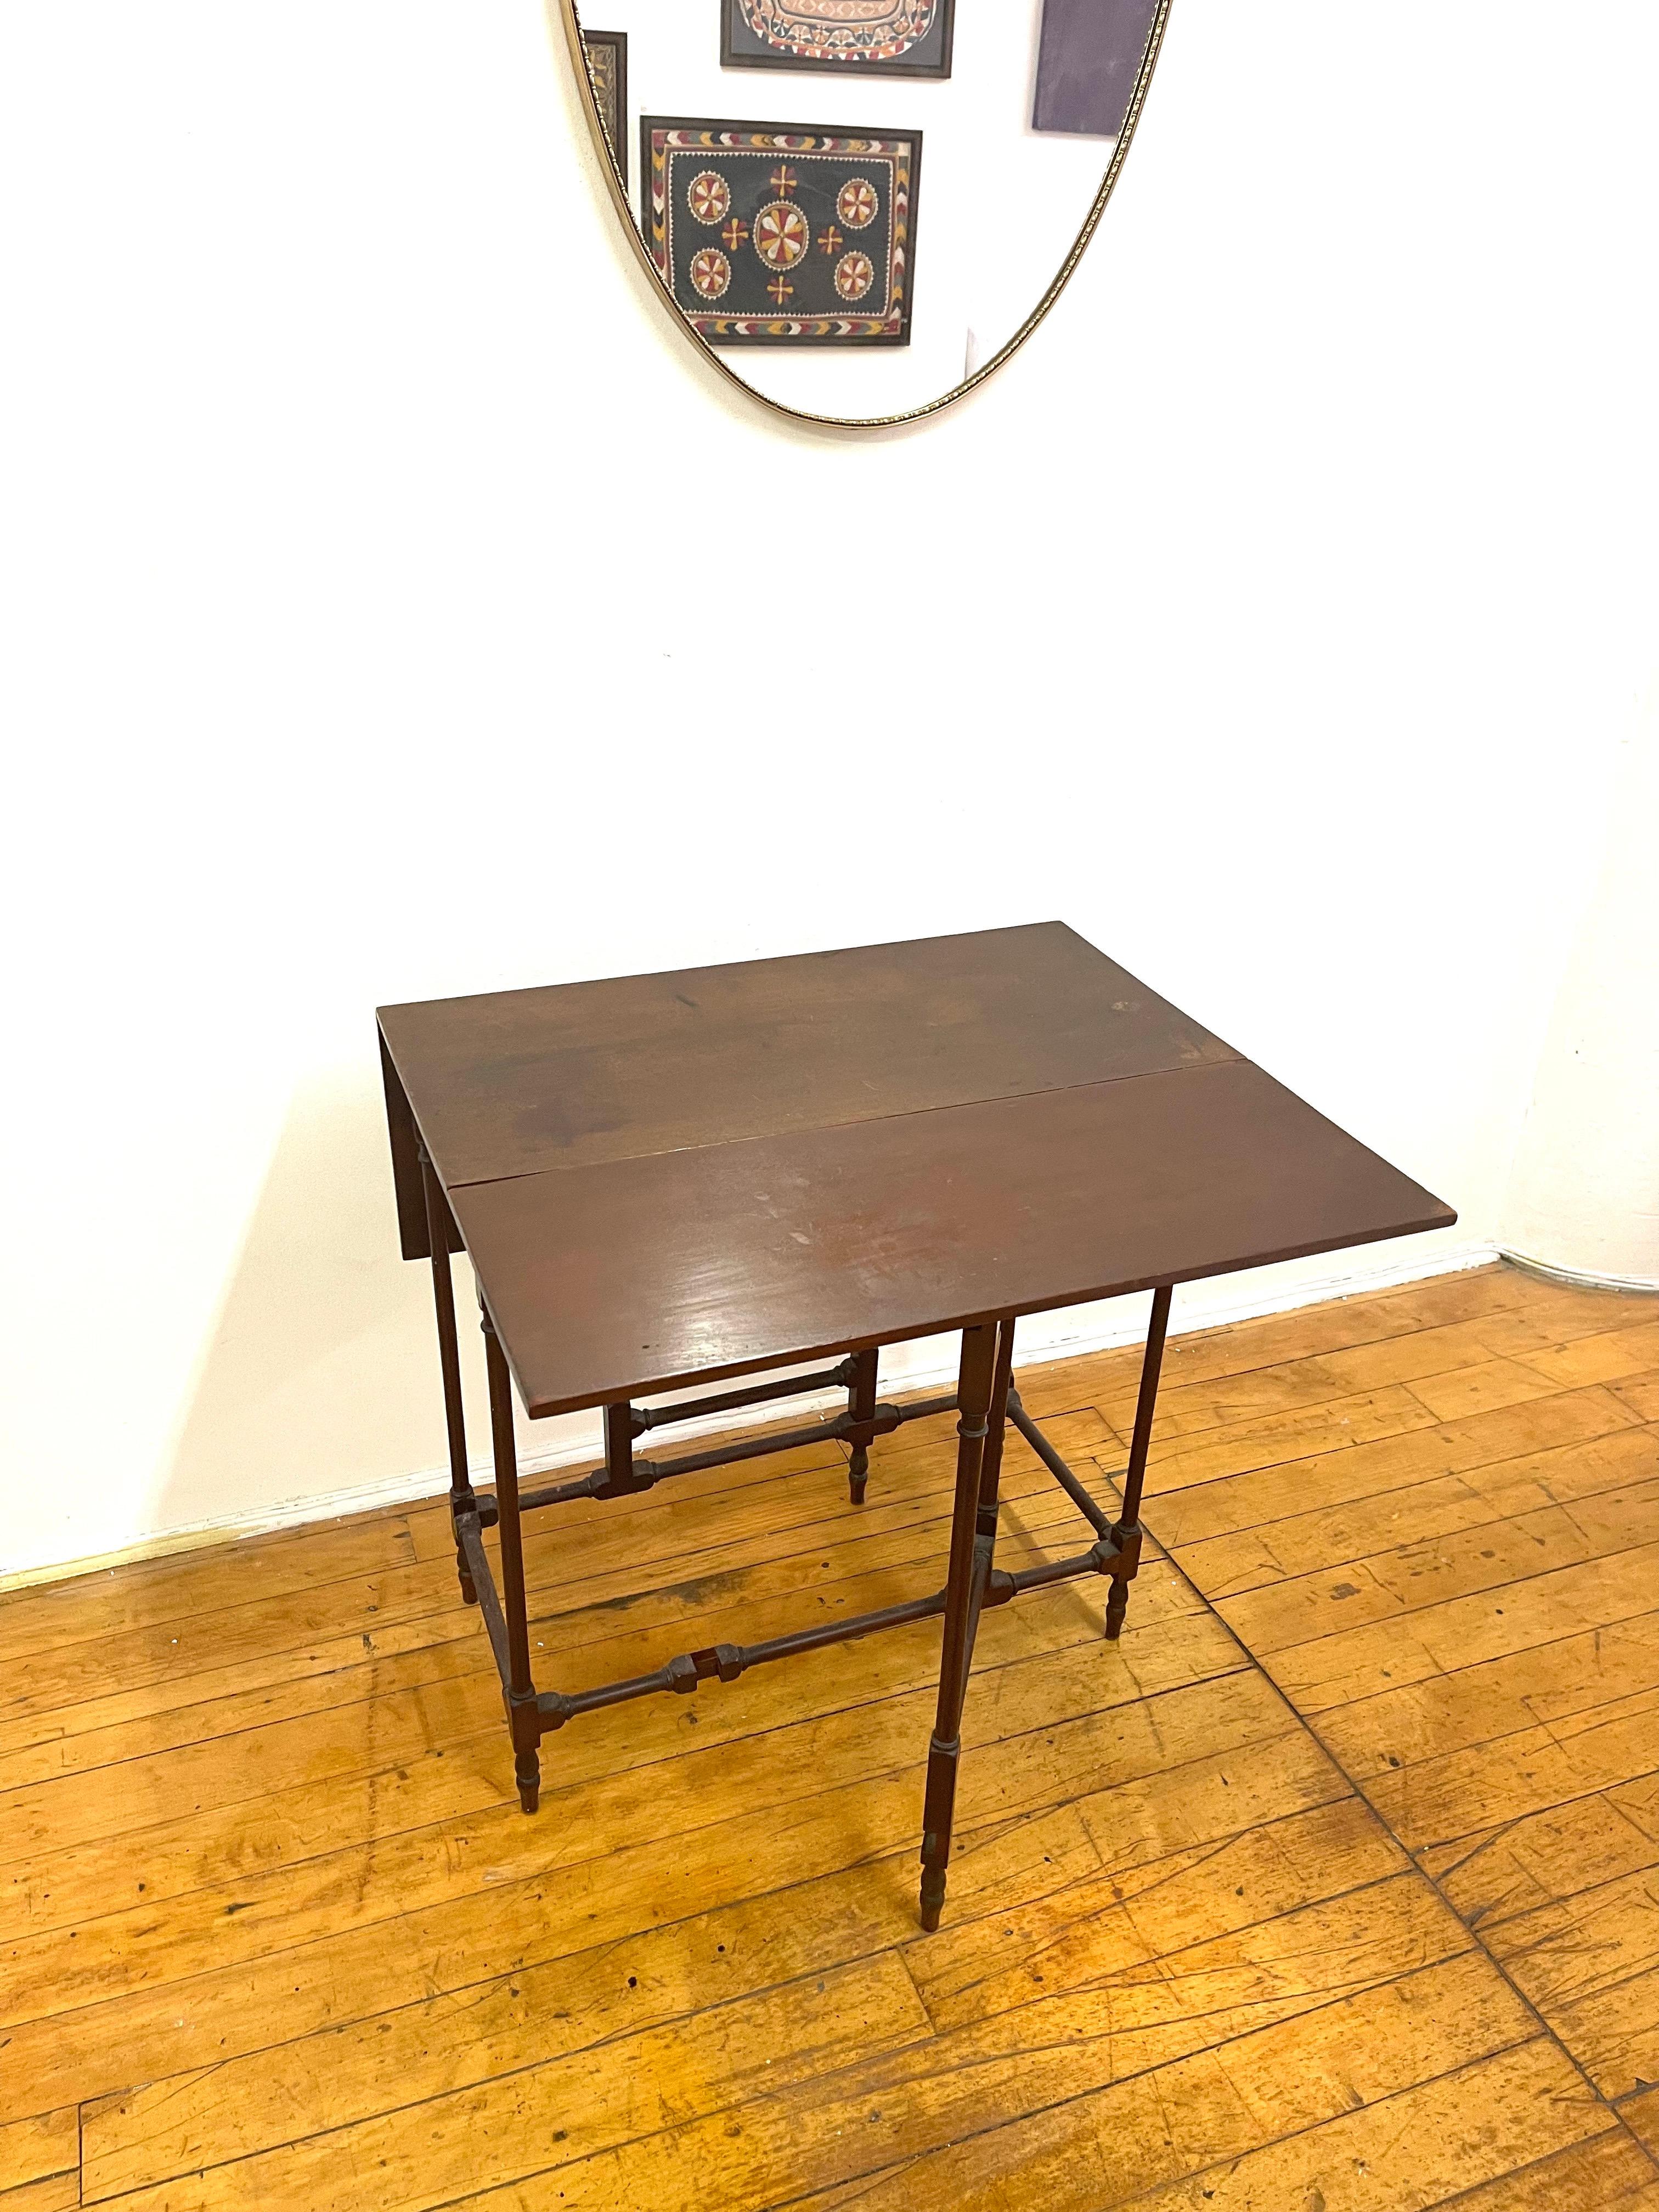 Mid-20th Century English Antique Willson 68 Great Queenstreet London Side Table Console For Sale